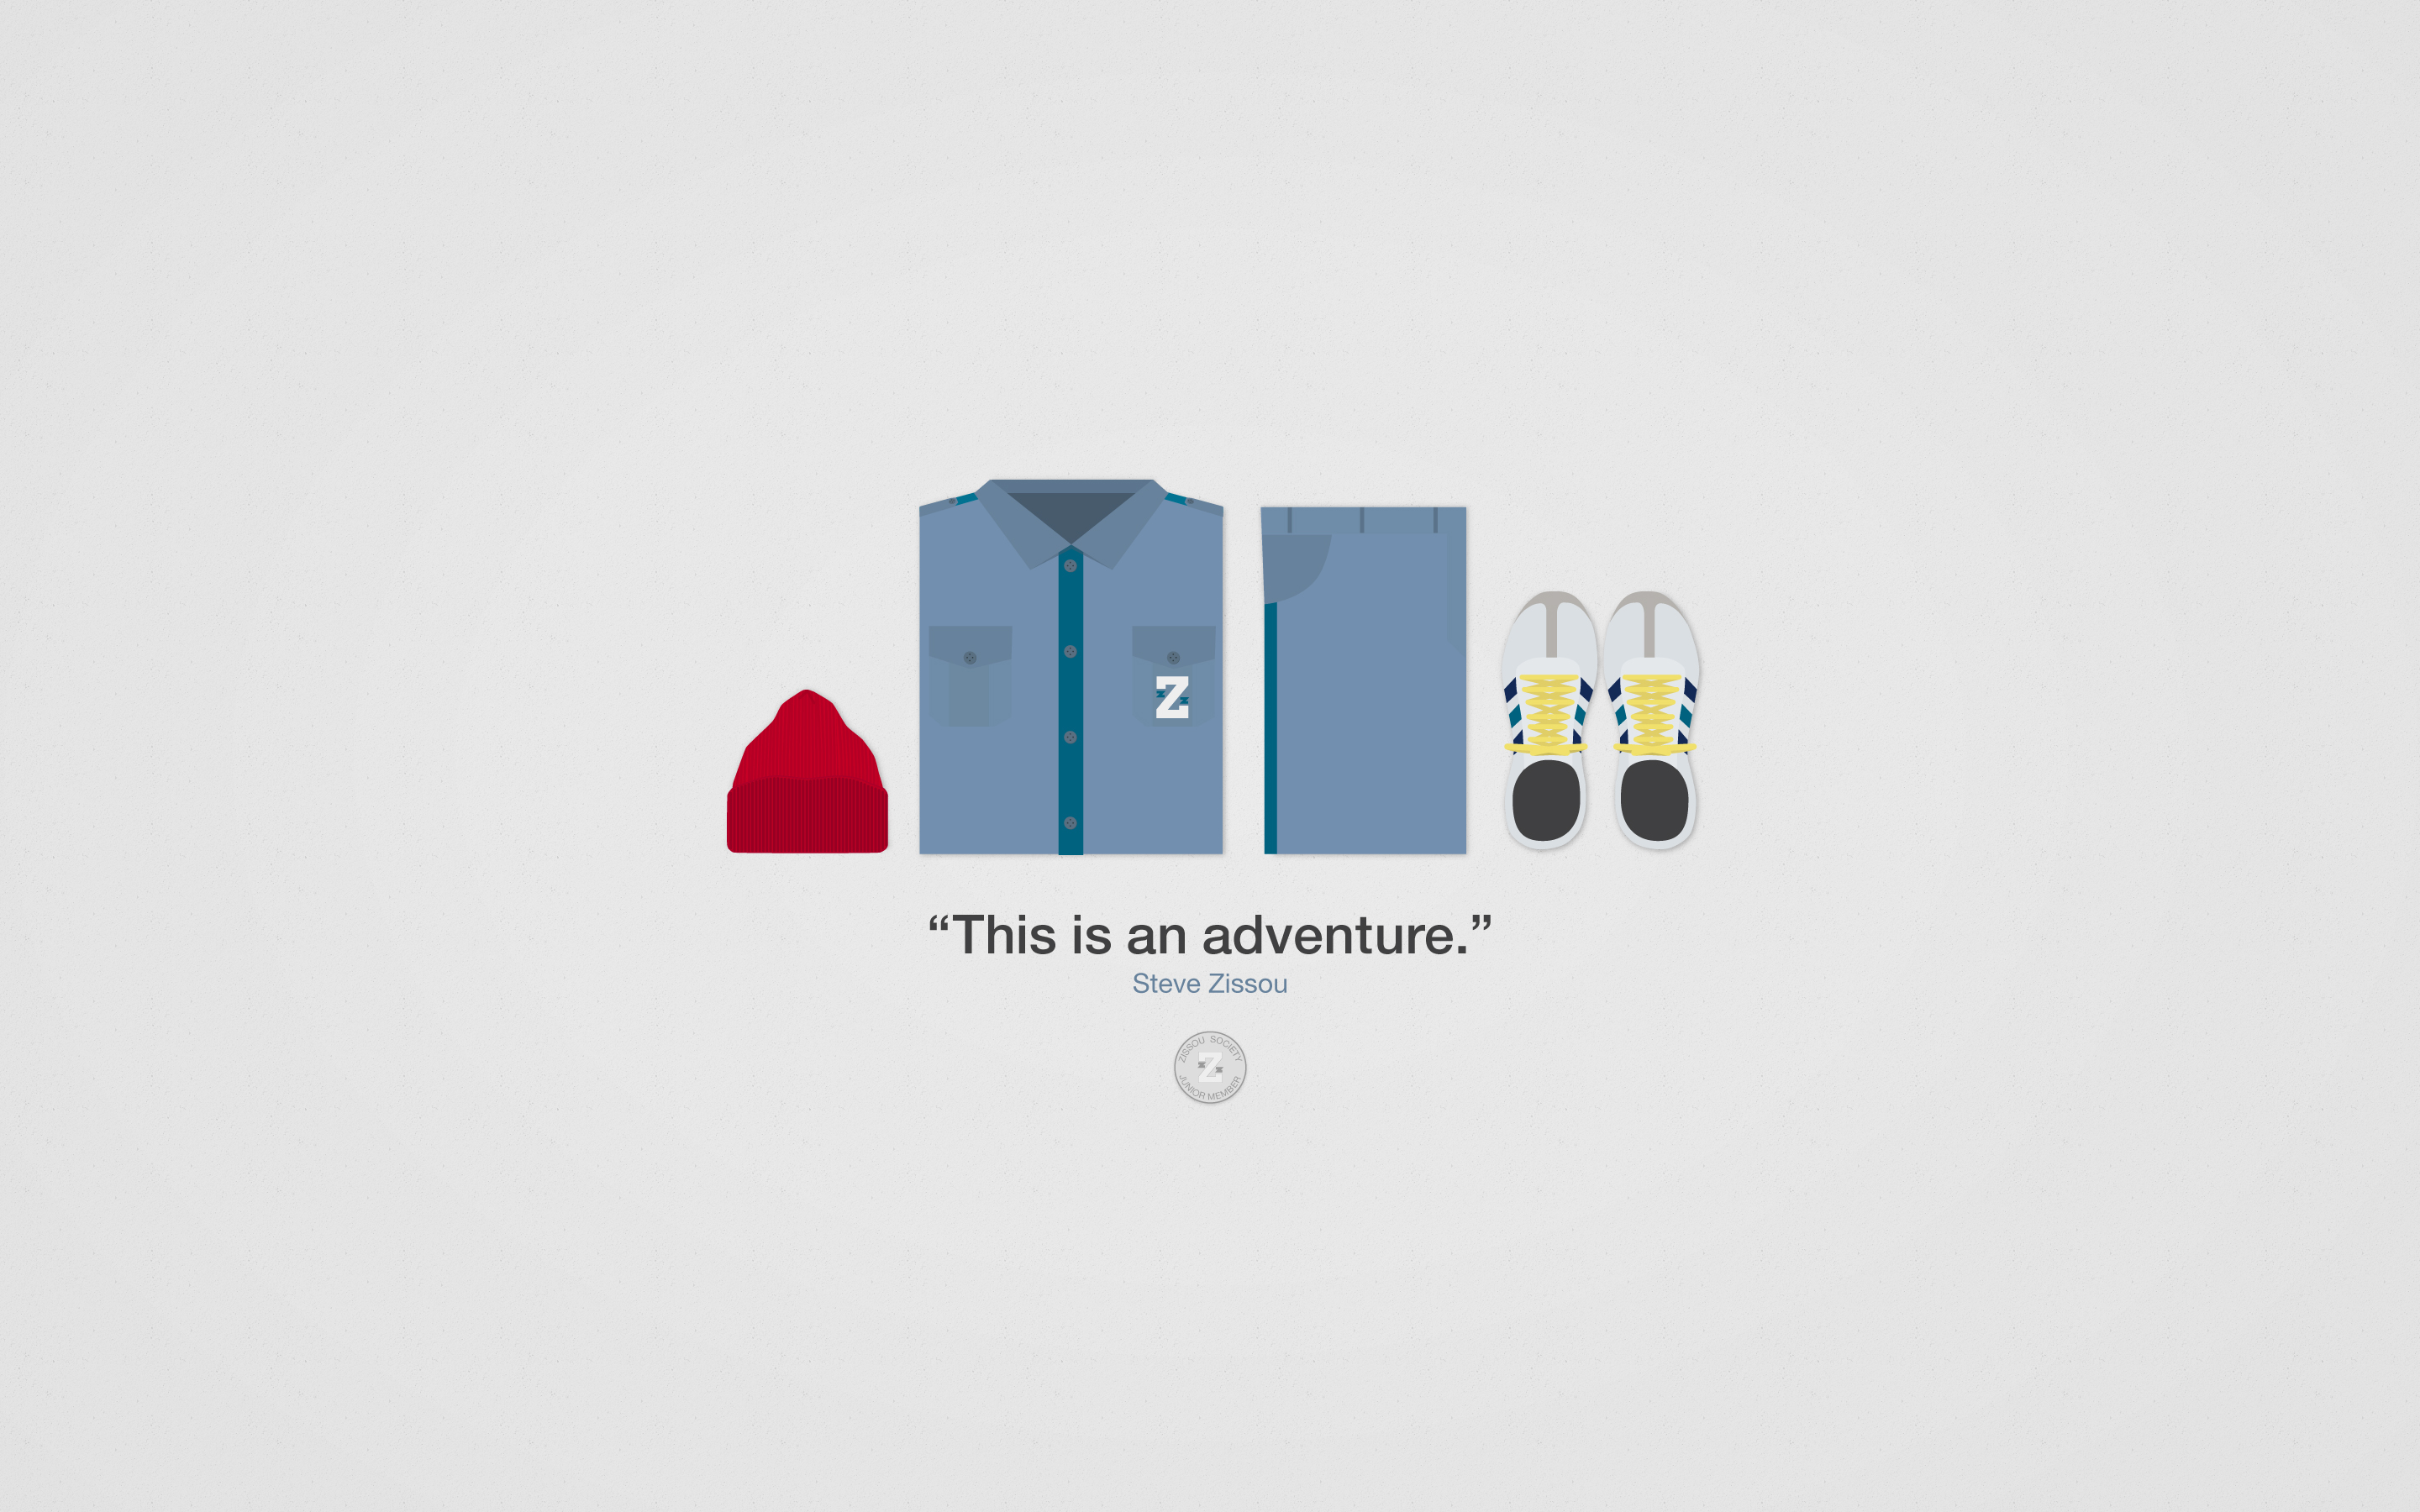 wes anderson, movie, the life aquatic with steve zissou, minimalist